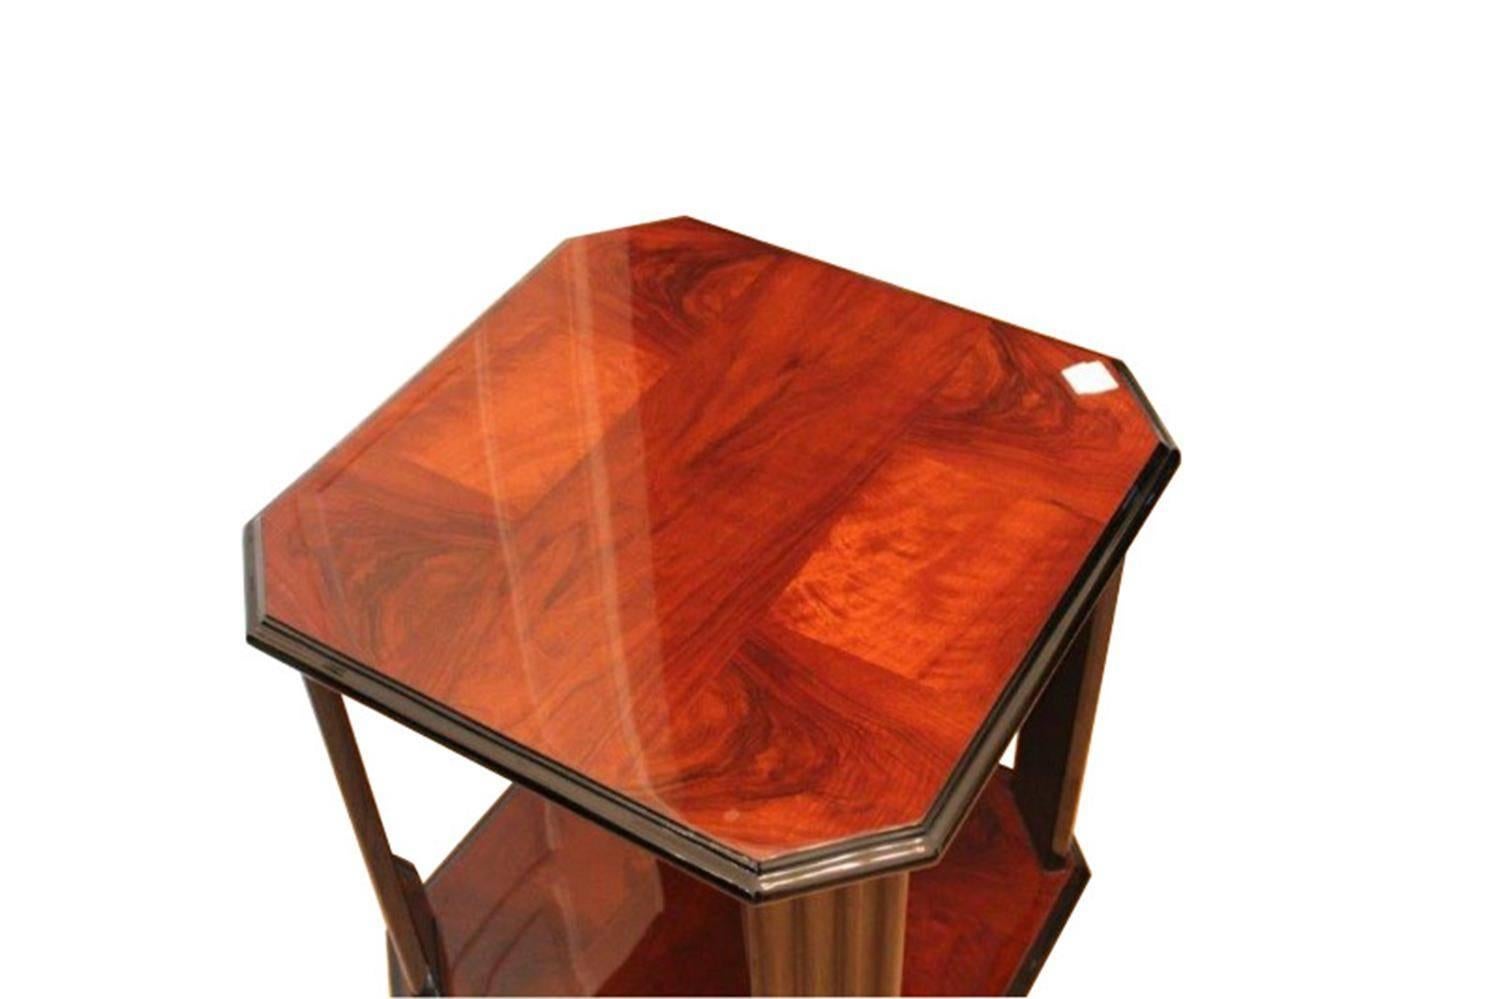 Polished French Art Deco Side Table Made of Walnut